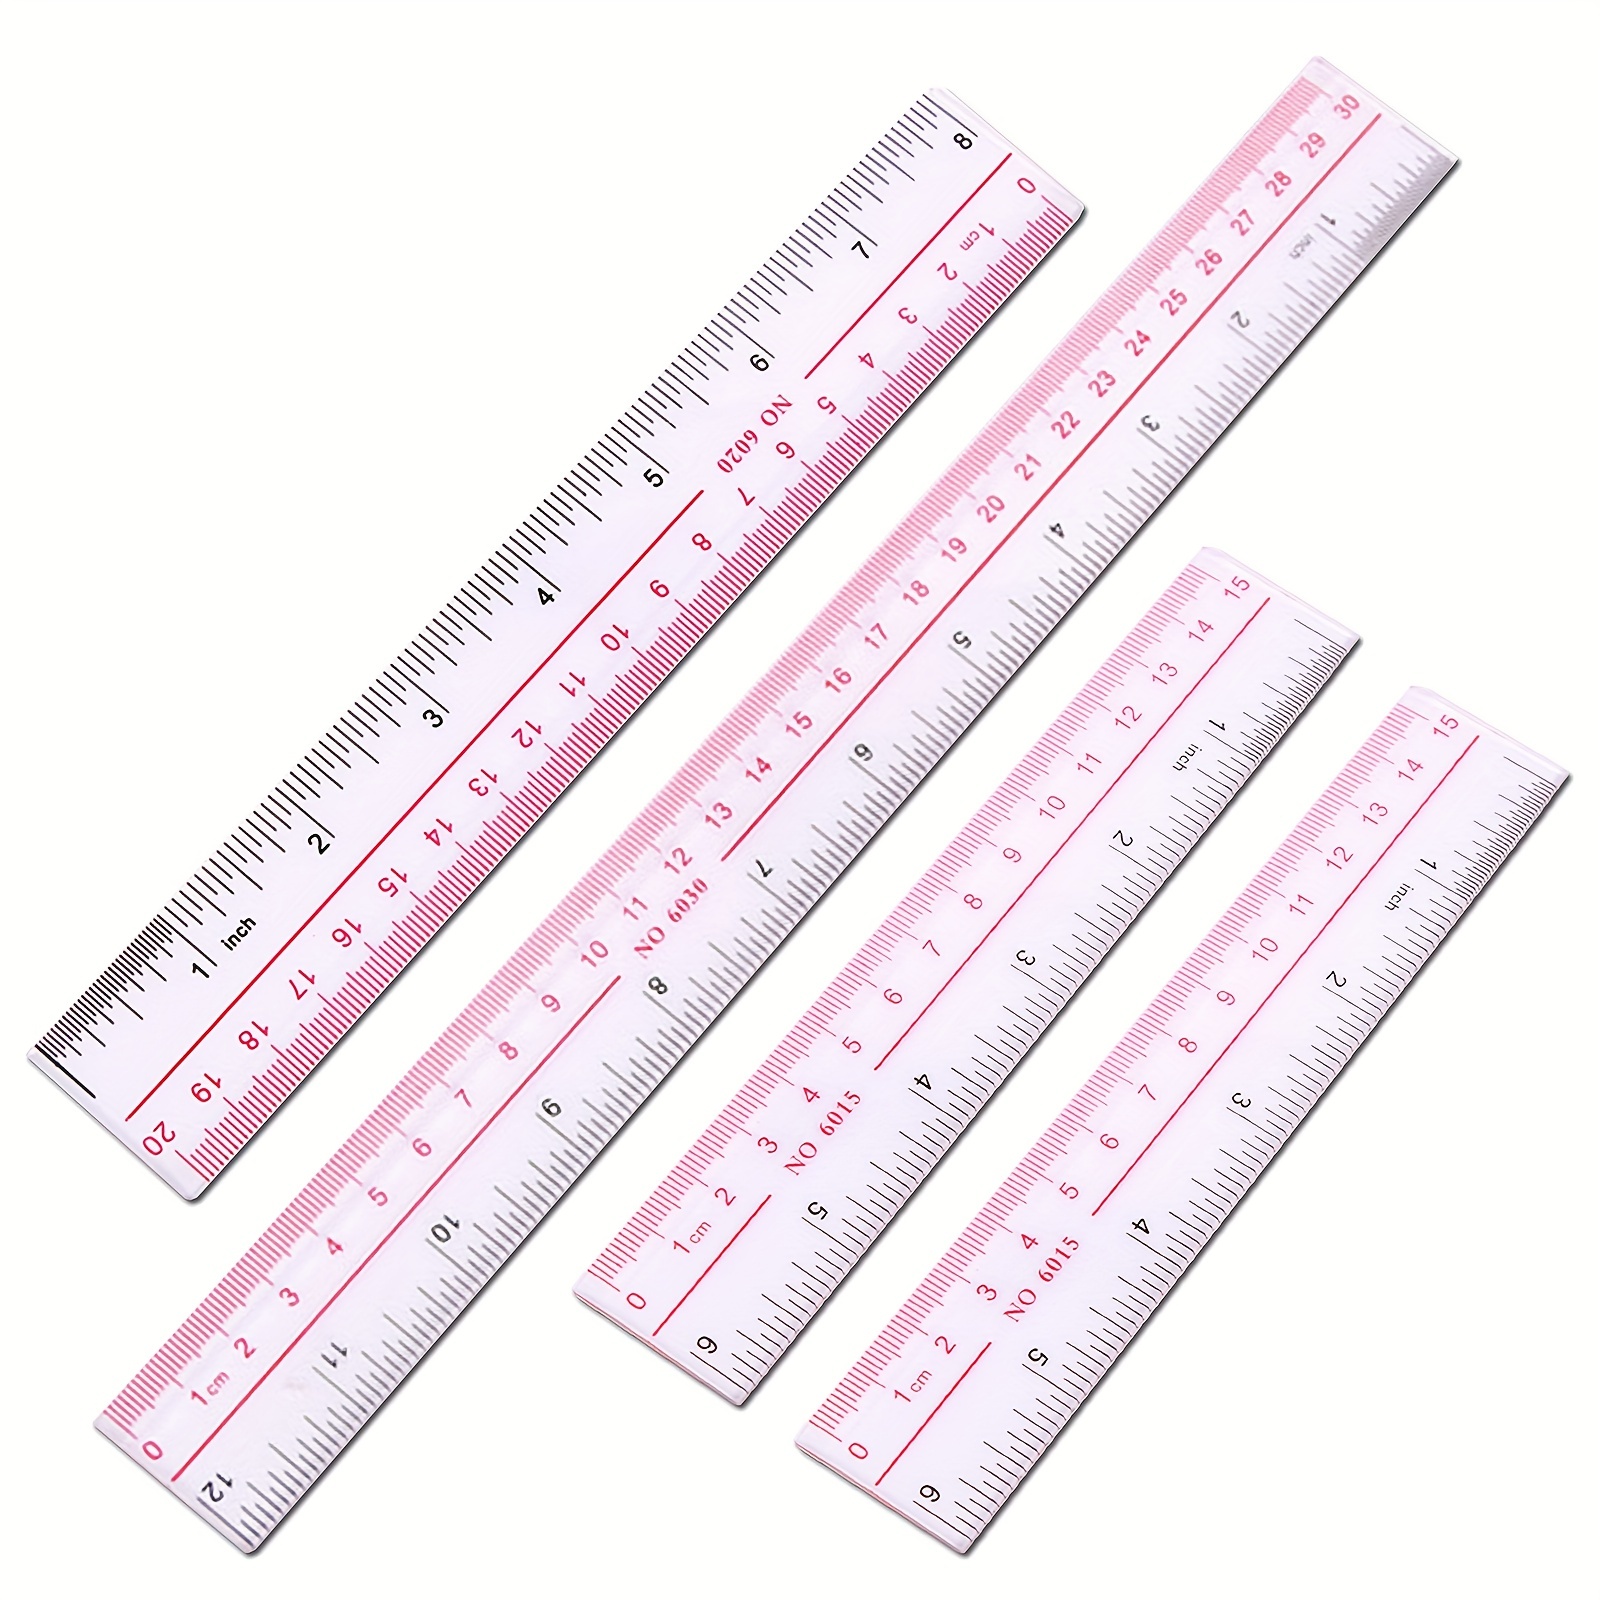 6 Pcs Clear Ruler ,6 inch Ruler, Plastic Ruler, Drafting Tools, Rulers for  Kids, Measuring Tools, Ruler Set, Ruler inches and Centimeters, Transparent